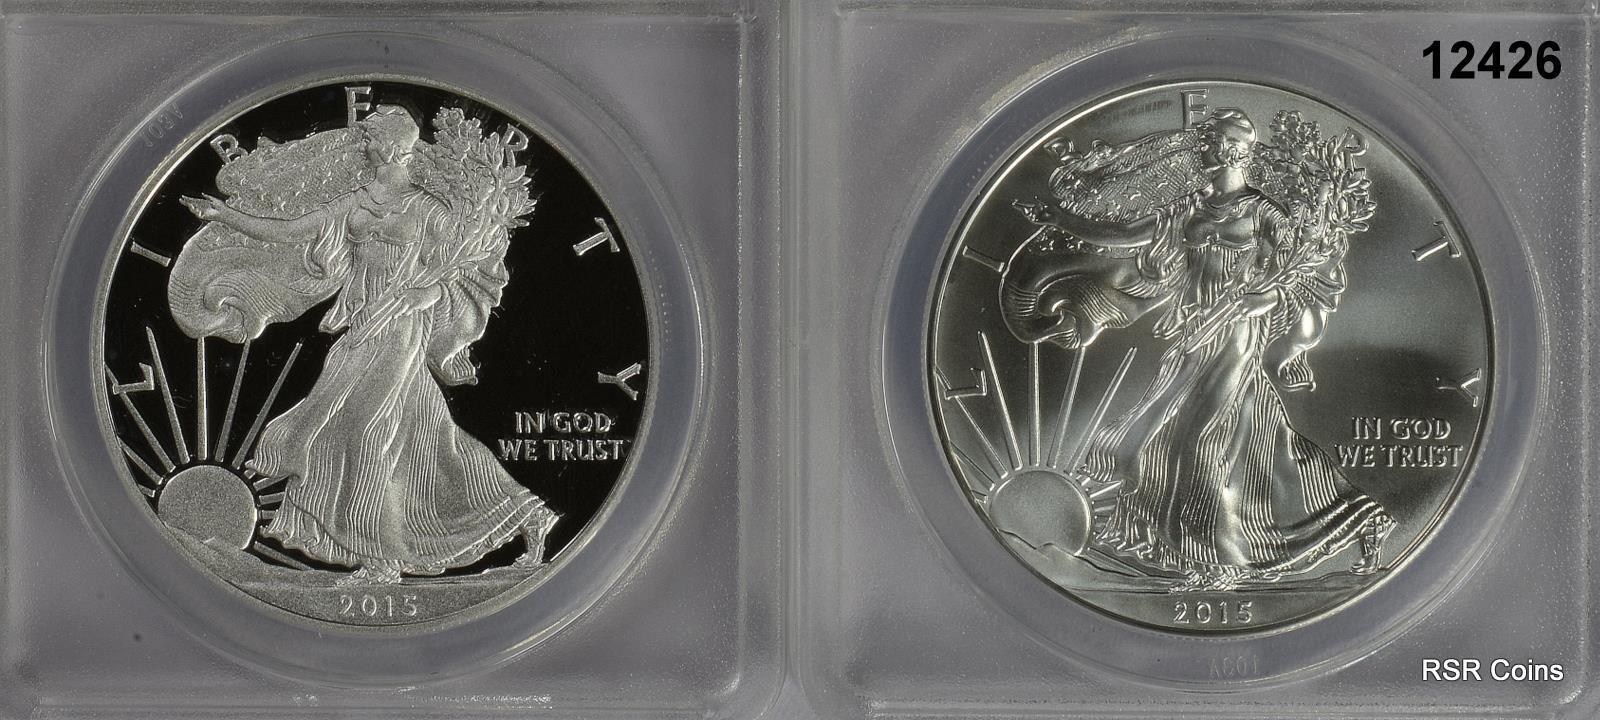 2015 W & P 2 COIN SILVER EAGLE SET ANACS CERTIFIED PR70 & MS70 PERFECT! #12426